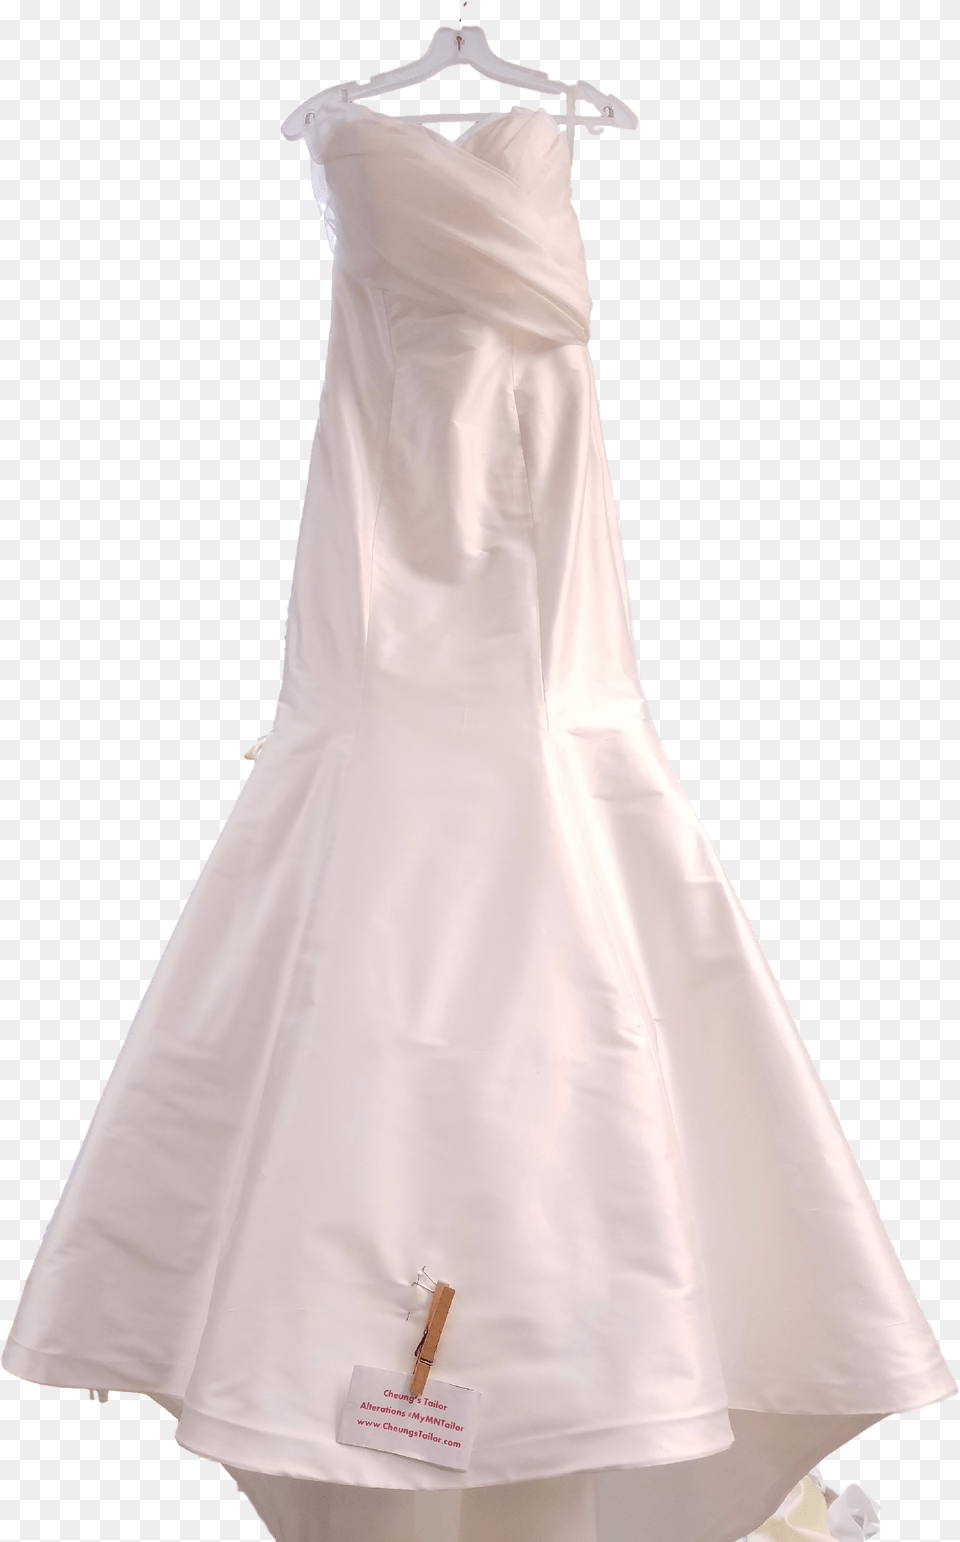 Professional Wedding Dress Pressing Amp Steaming Near Gown, Clothing, Evening Dress, Fashion, Formal Wear Free Png Download